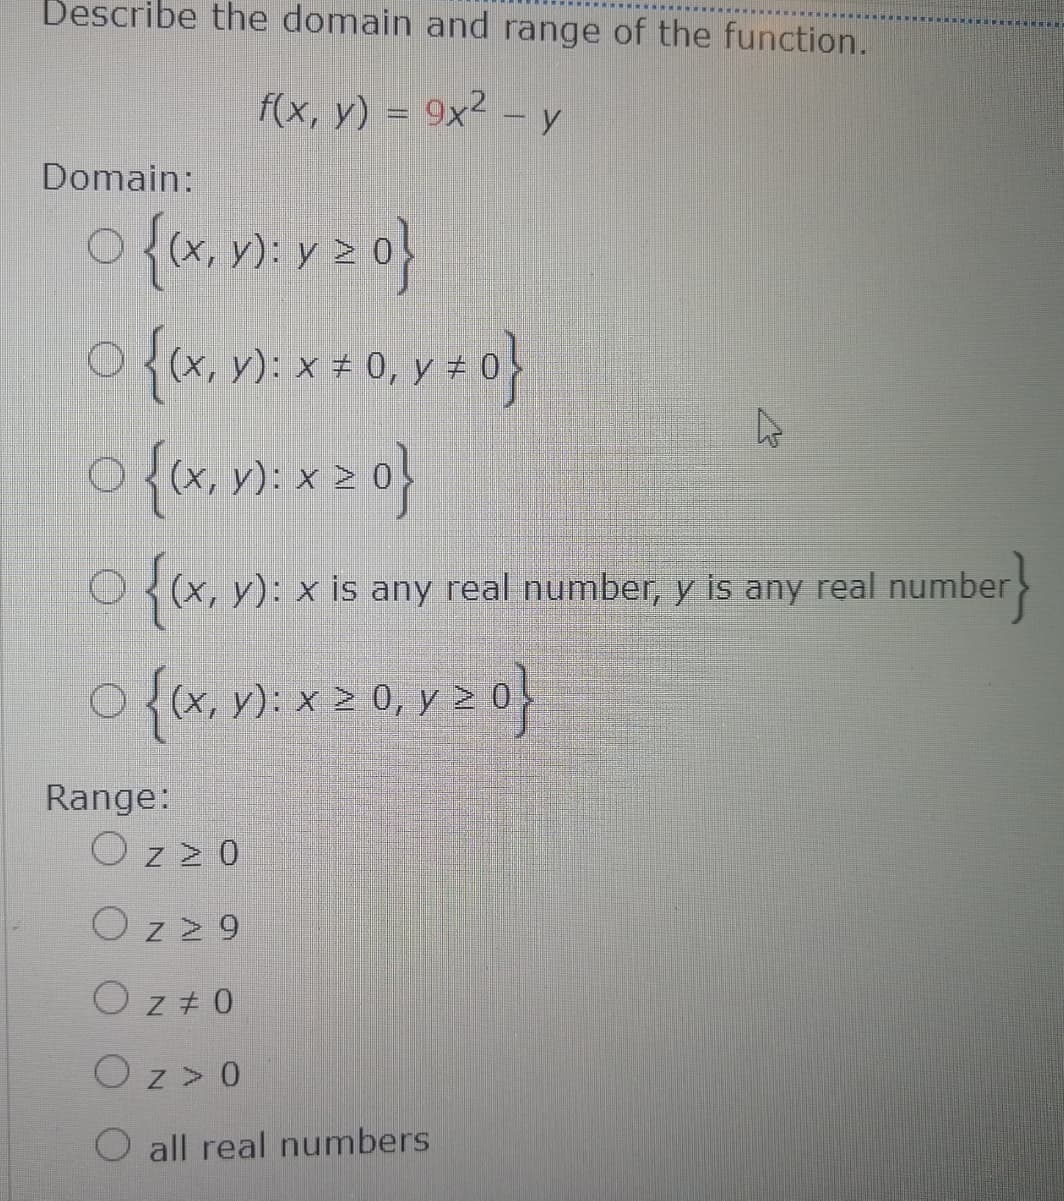 Describe the domain and range of the function.
f(x, y) = 9x² –y
Domain:
O(x, y): x # 0, y #
{(x, v): x 2 0}
3(x, y): x is any real number, y is any real number
>
(x, y): x > 0, y > 0
Range:
O z z 0
Oz29
O z + 0
Oz> 0
O all real numbers
